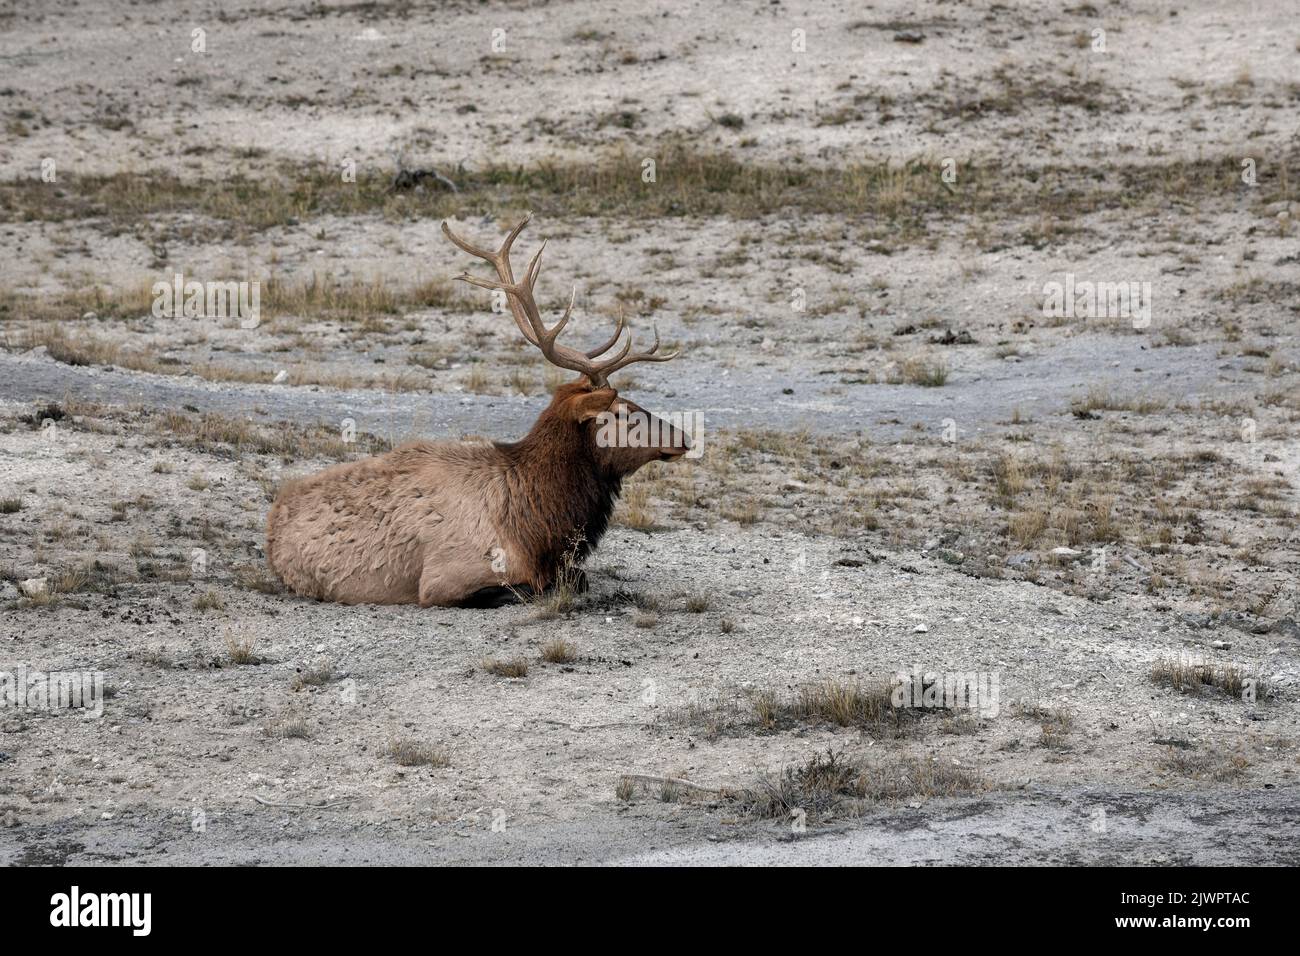 WY05050-00.....WYOMING - Bull elk (Cervus canadensis) Yellowstone National Park, Mammoth Hot Springs area. Stock Photo